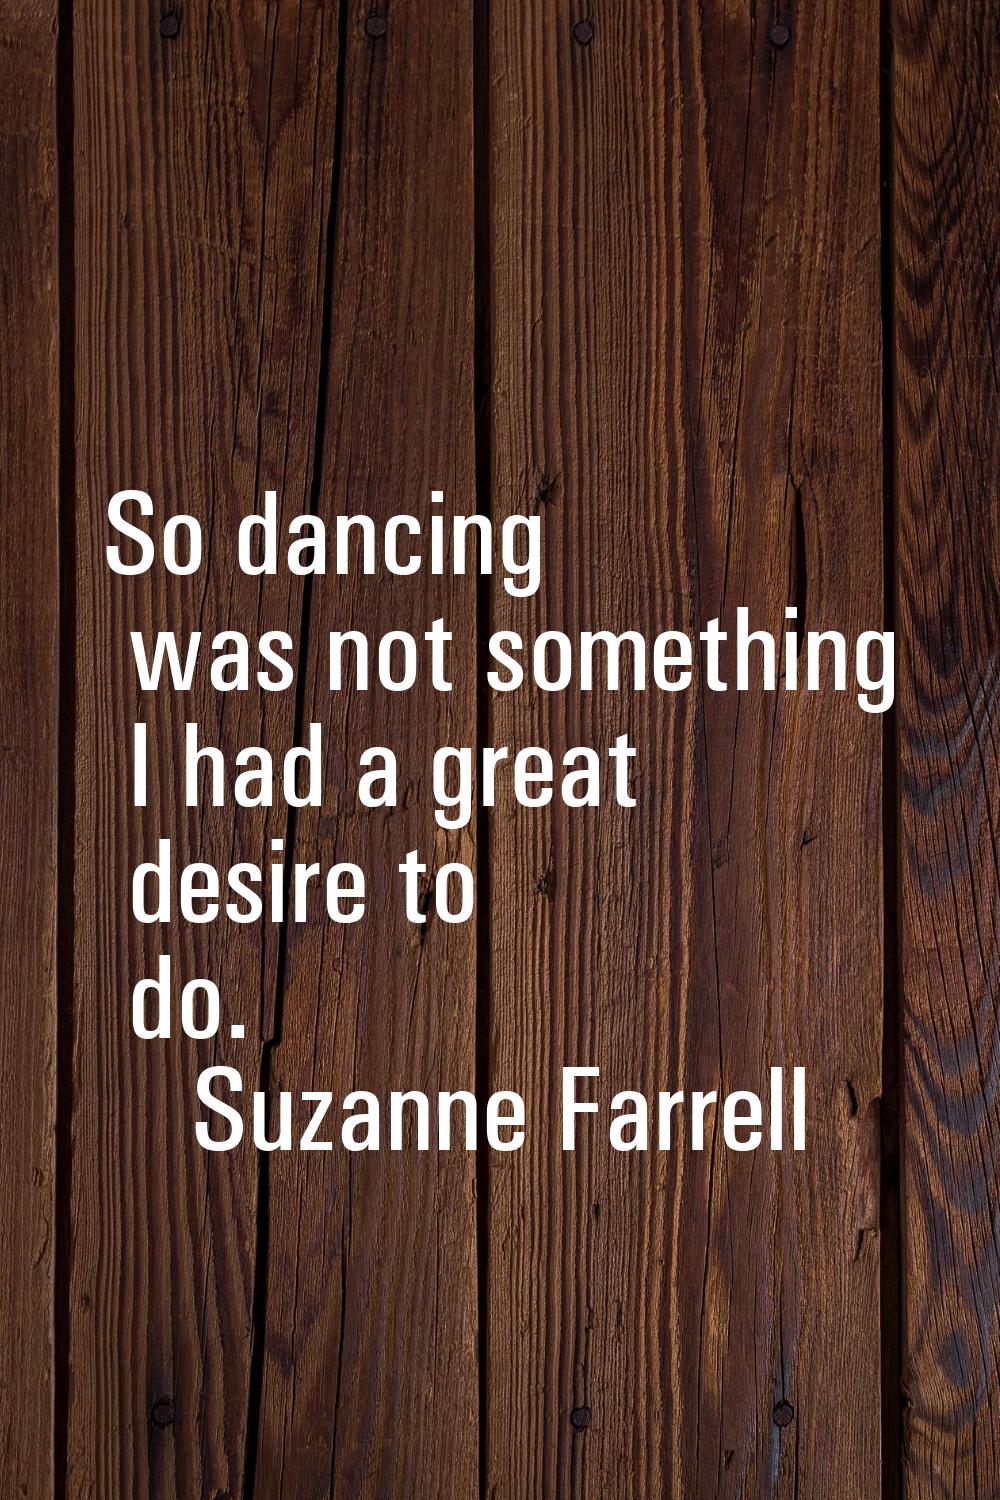 So dancing was not something I had a great desire to do.